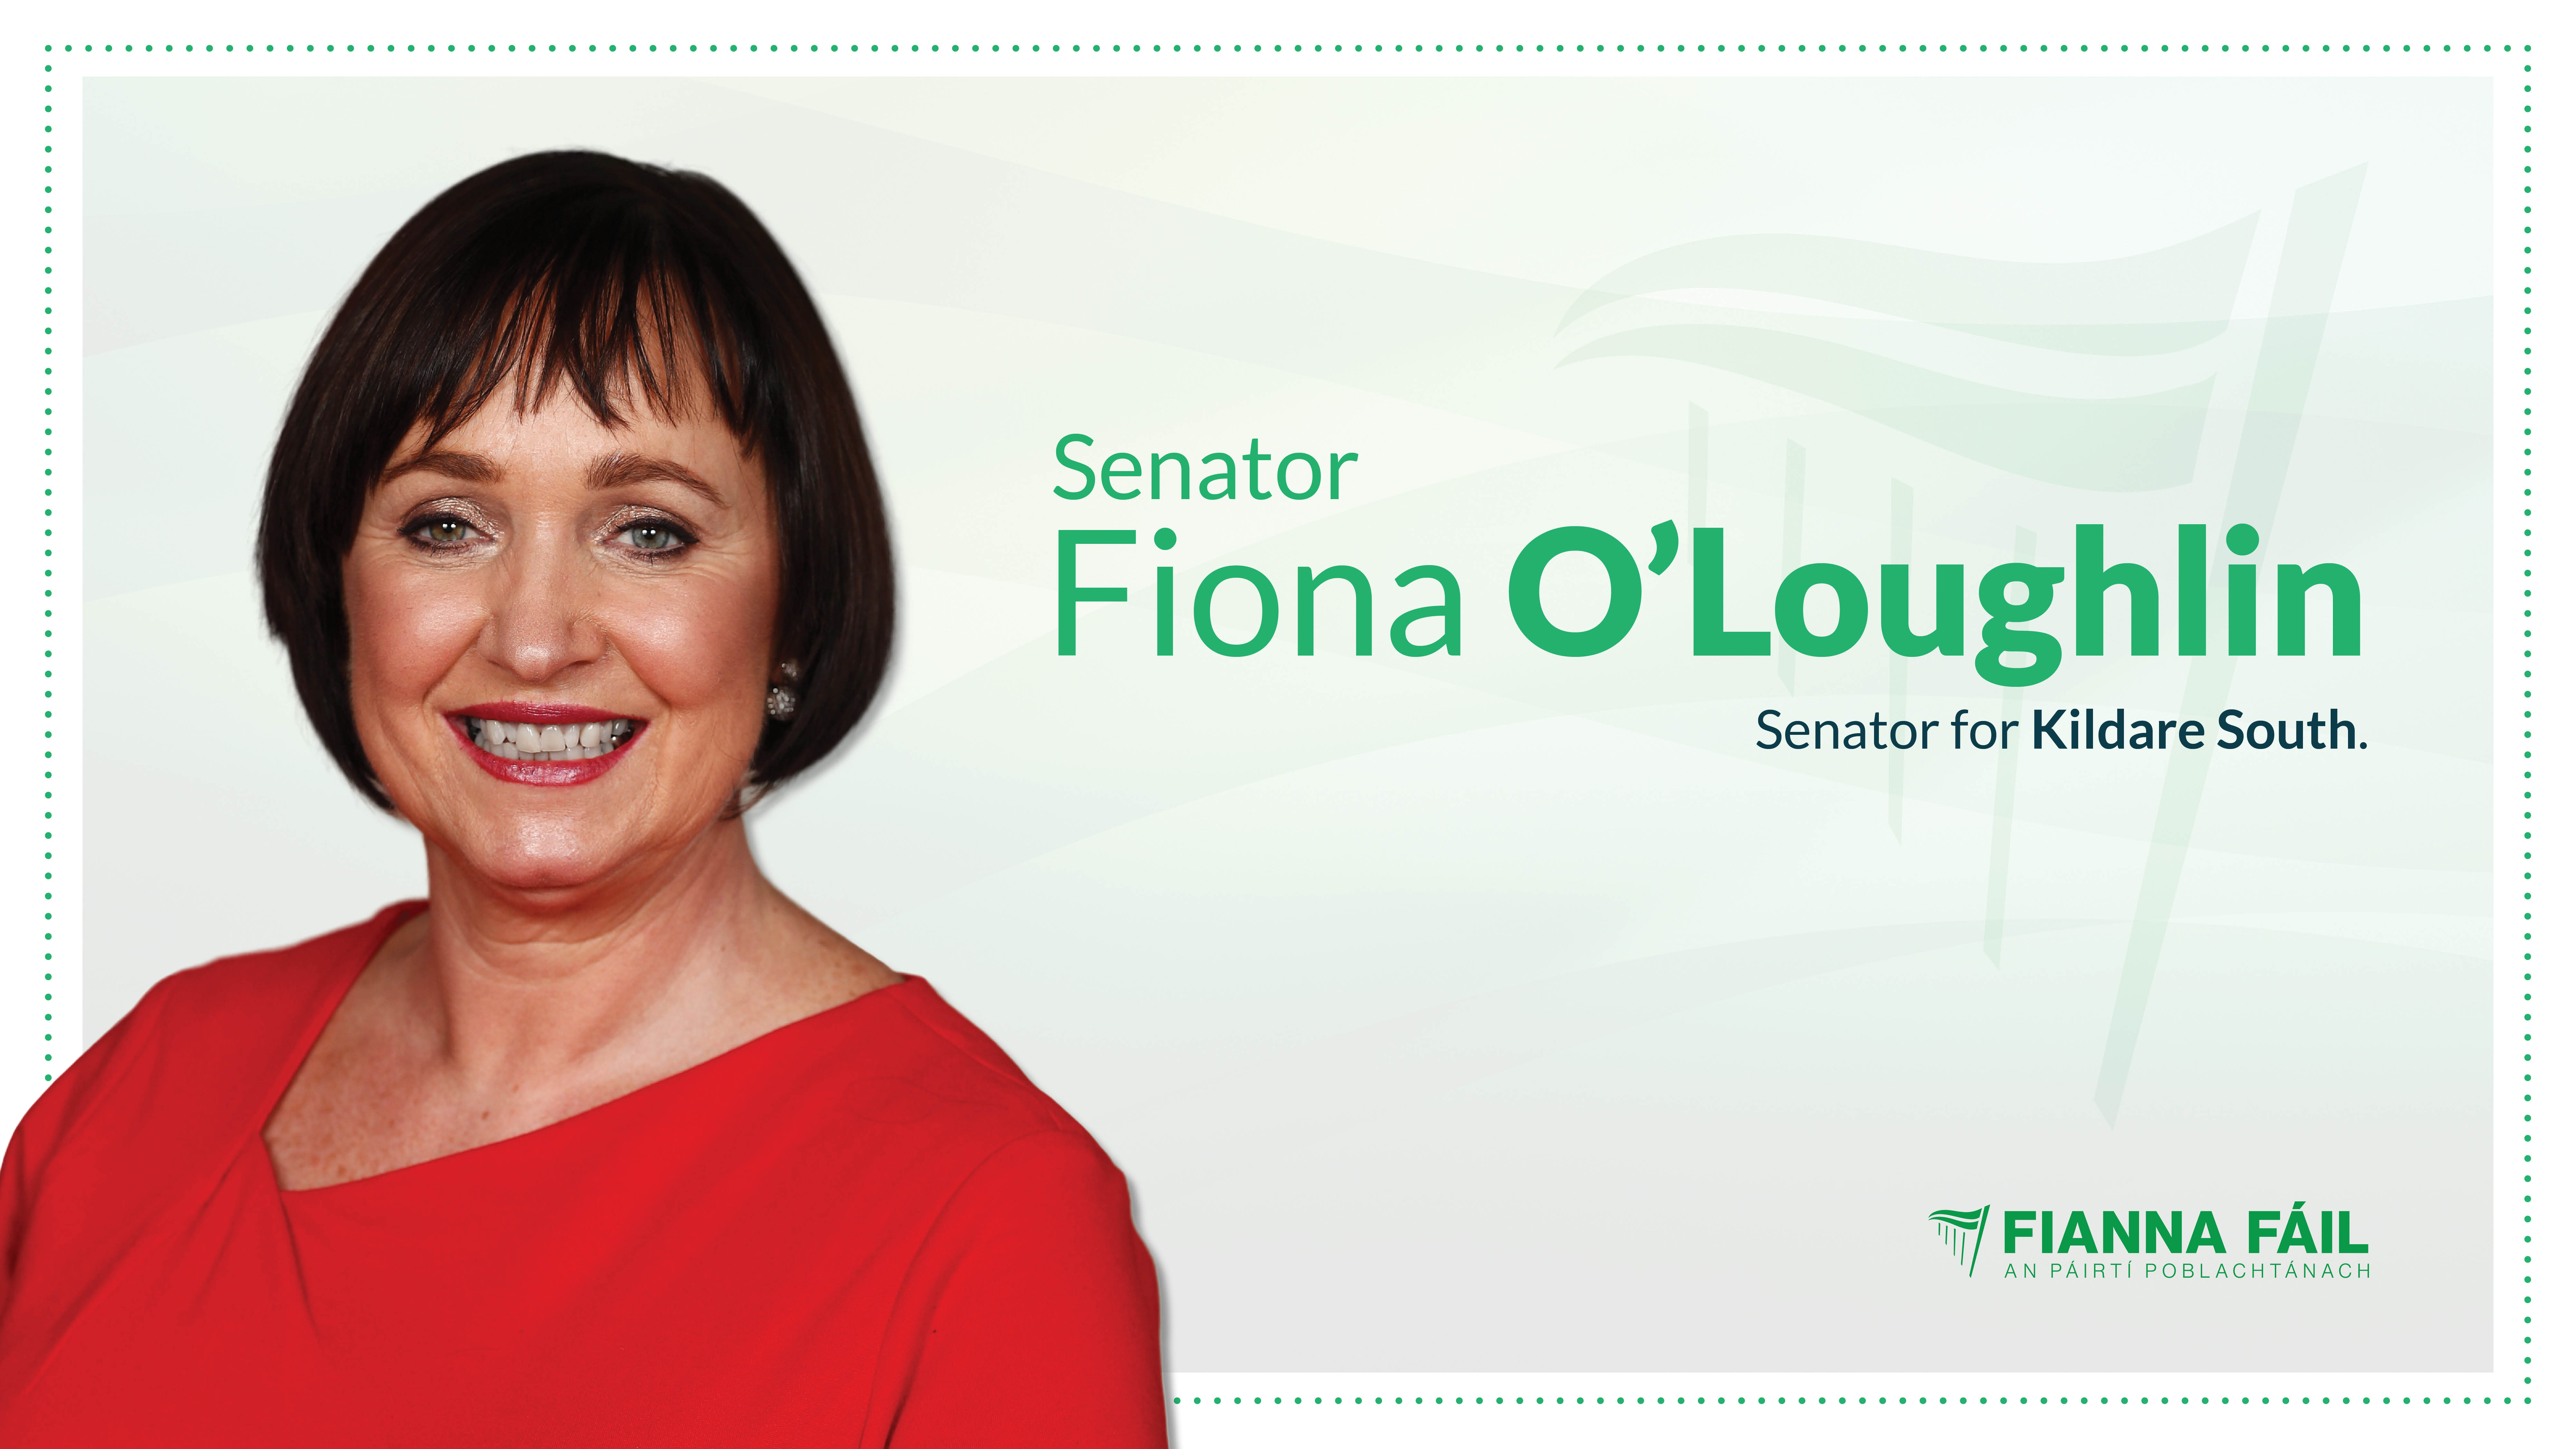 Family Leave Bill is a step in offering help to families to balance work and family life – O’Loughlin  